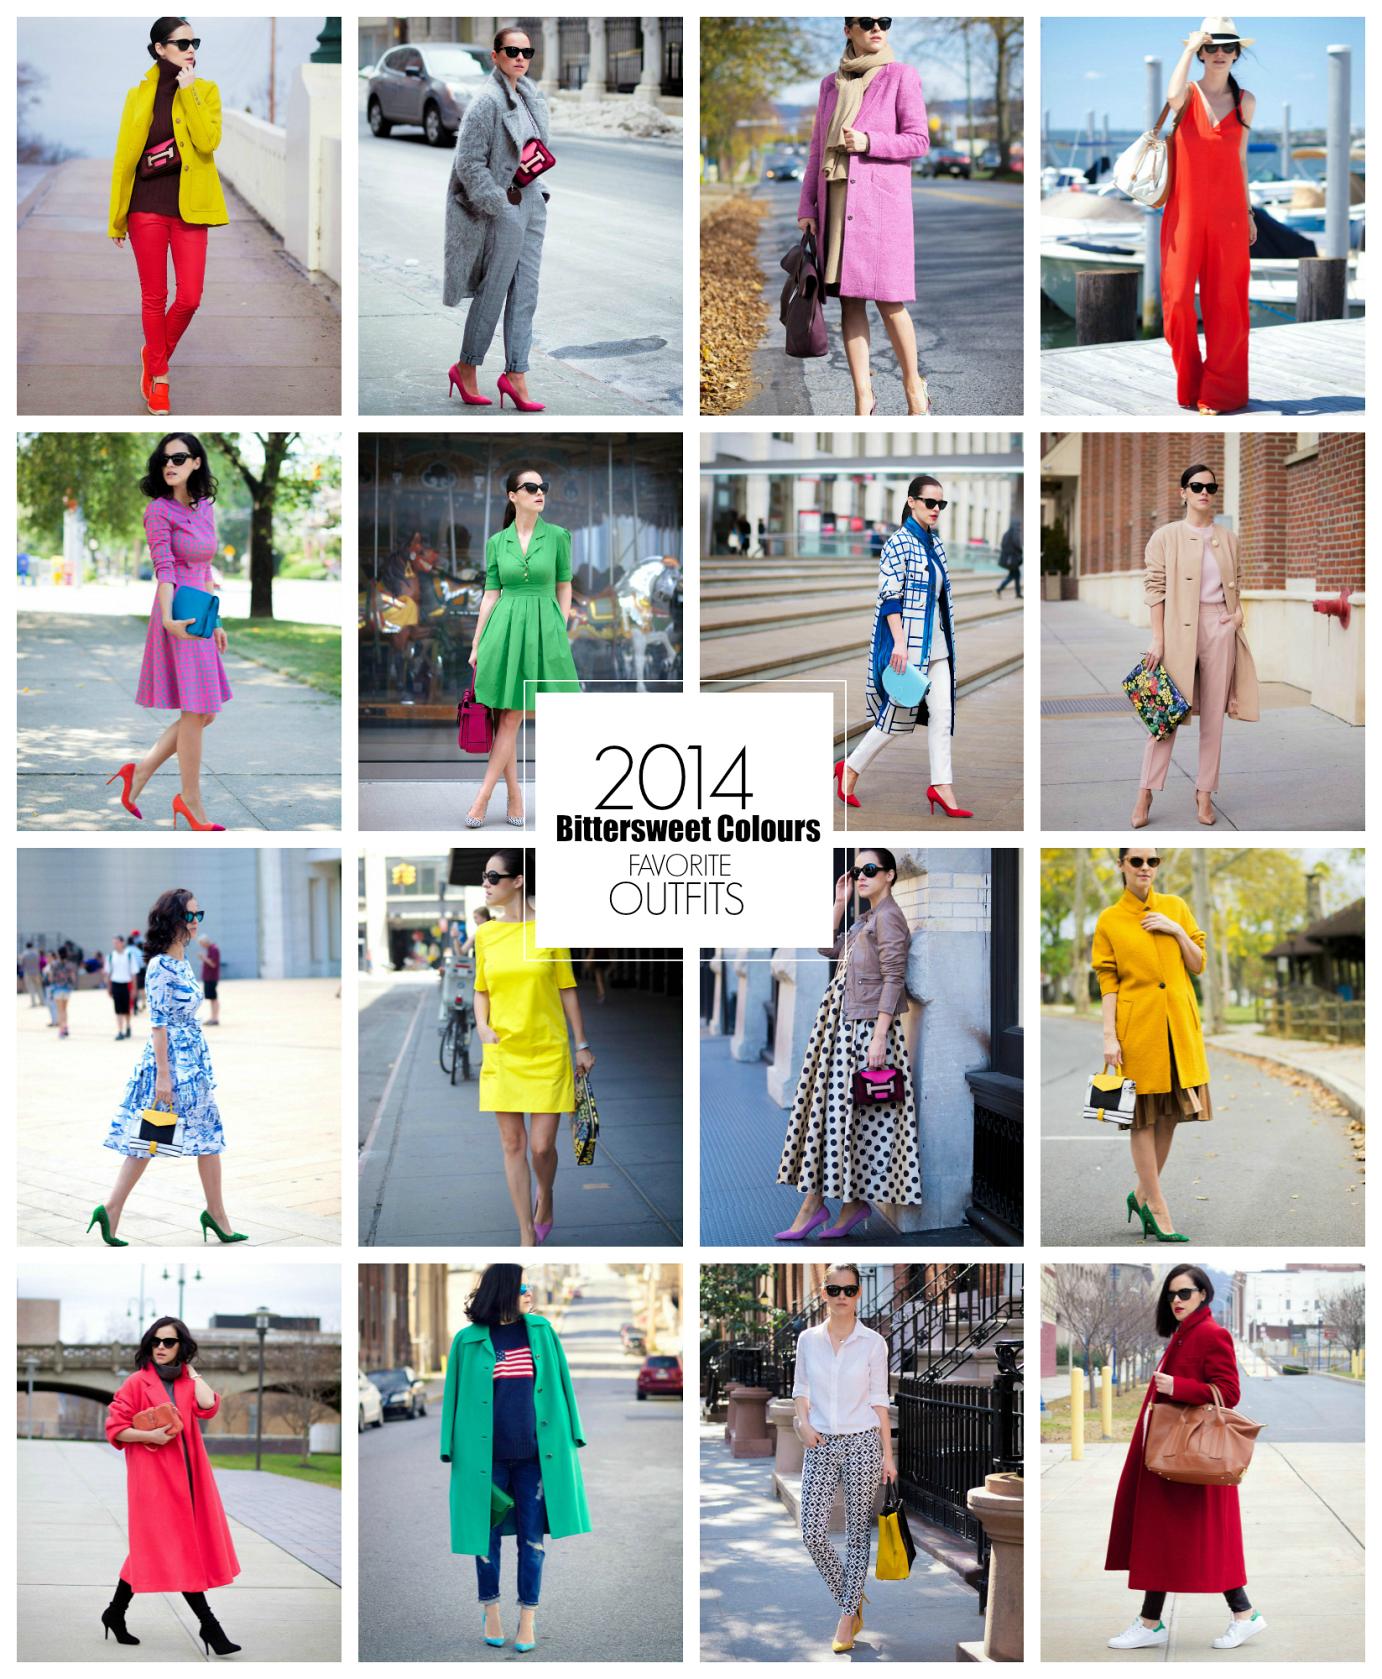 bittersweet colours, 2014 outfits, colors, street style, fall style, winter style, summer style, colorful coats, colorful shoes